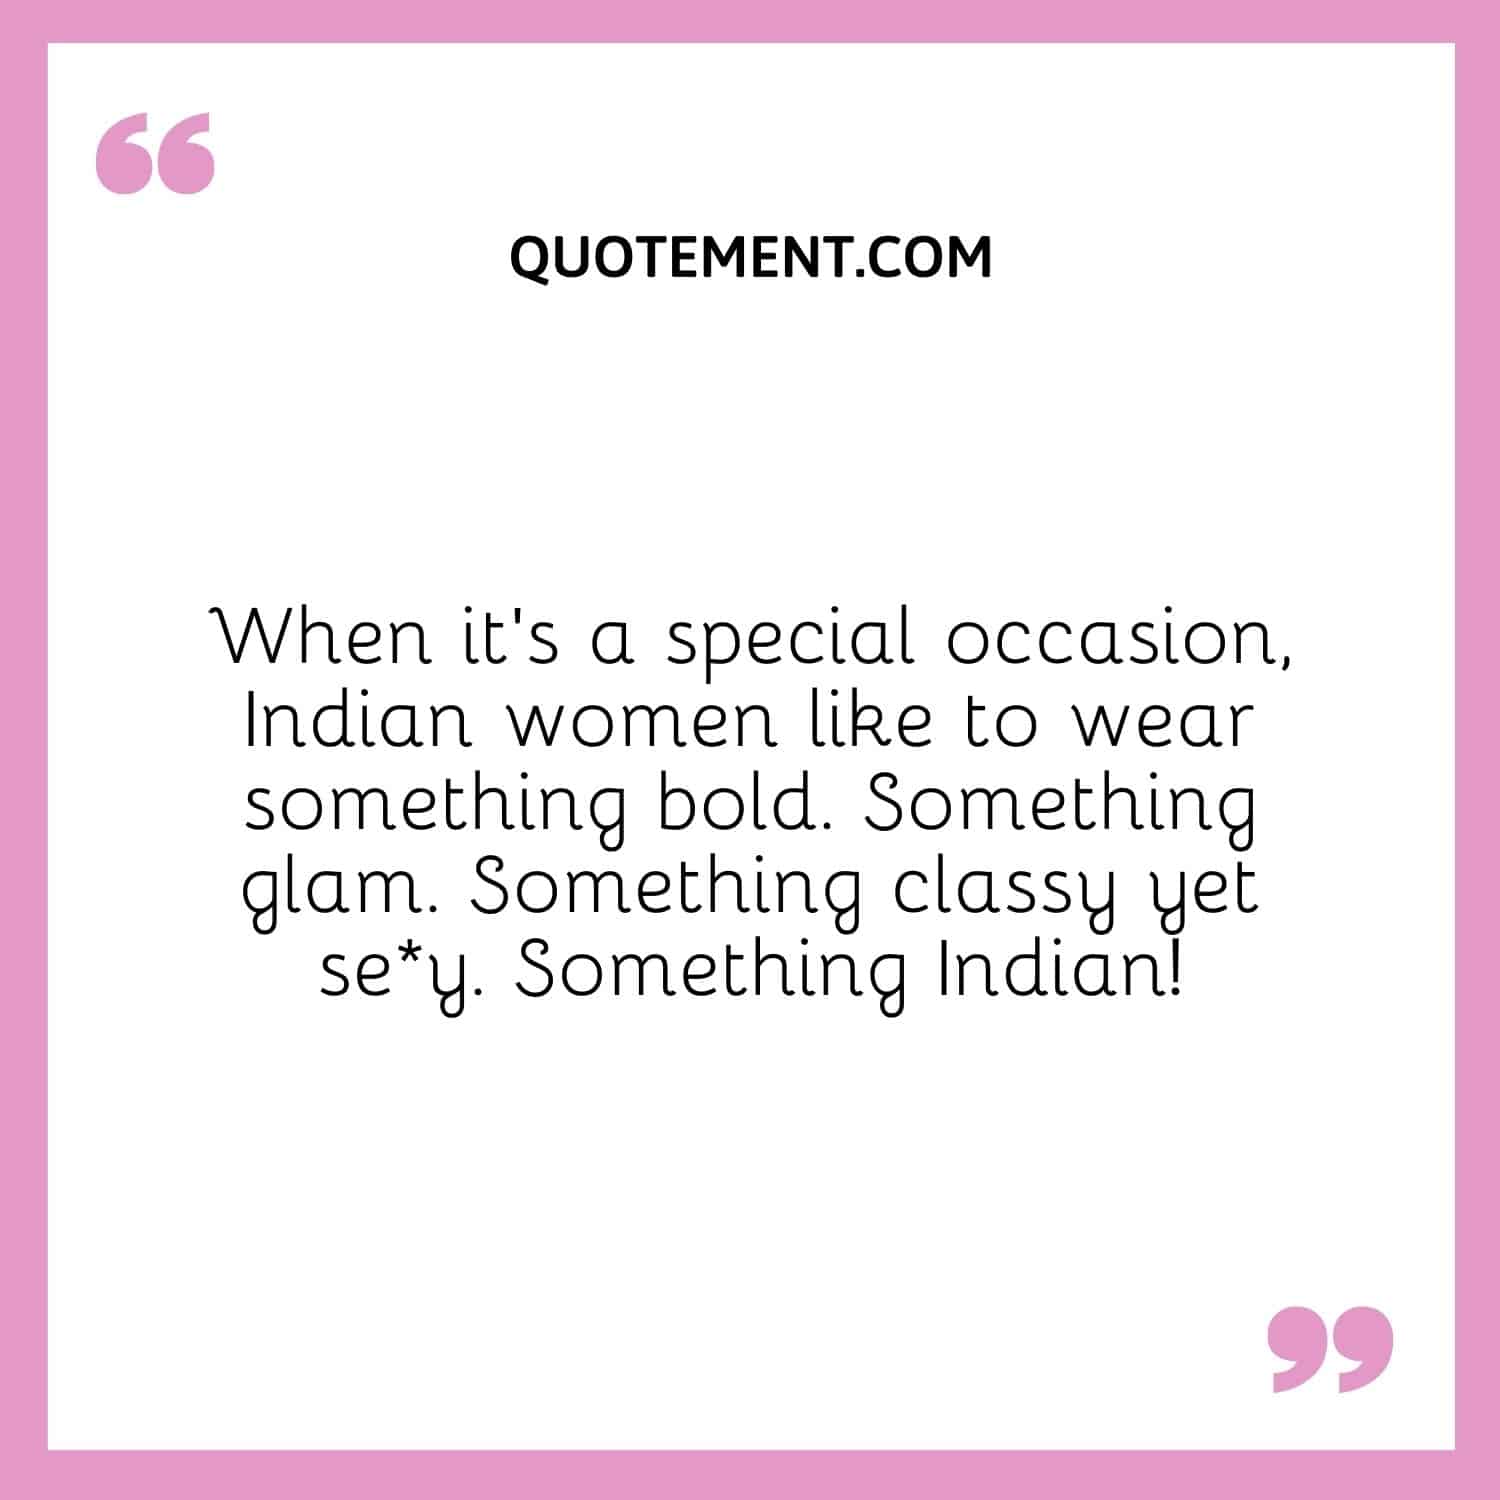 When it’s a special occasion, Indian women like to wear something bold. Something glam. Something classy yet sey. Something Indian!